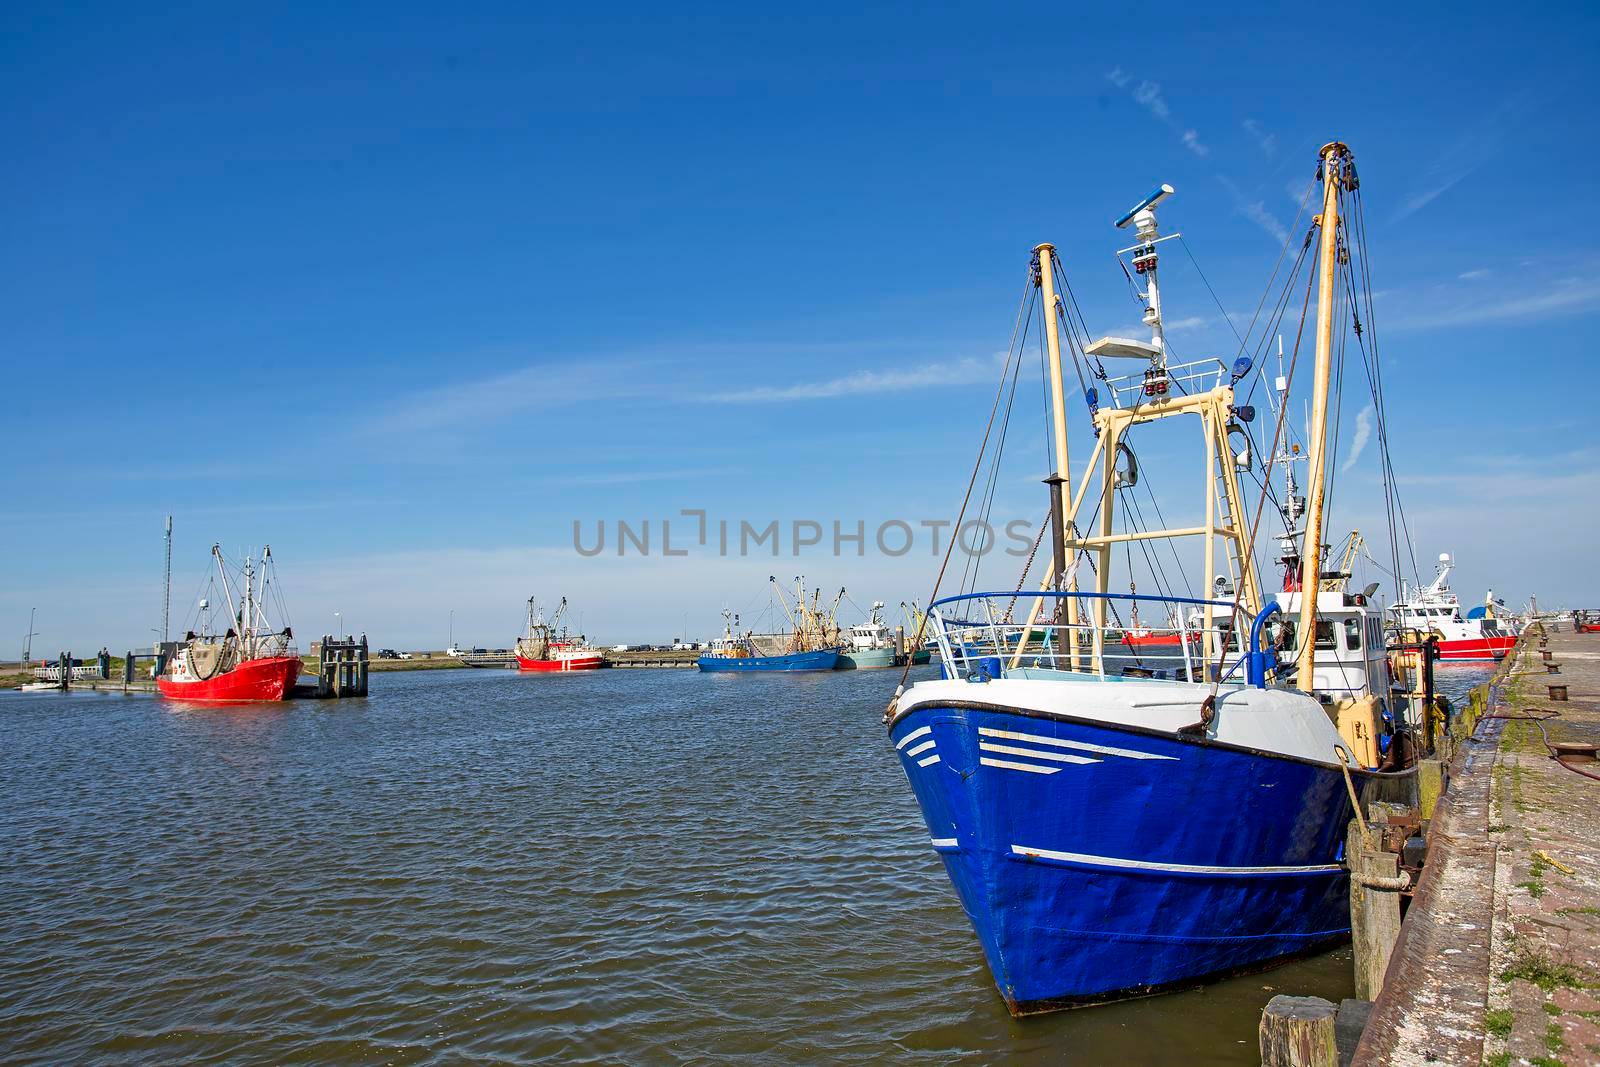 Fishing boat in the harbor from Lauwersoog in the Netherlands